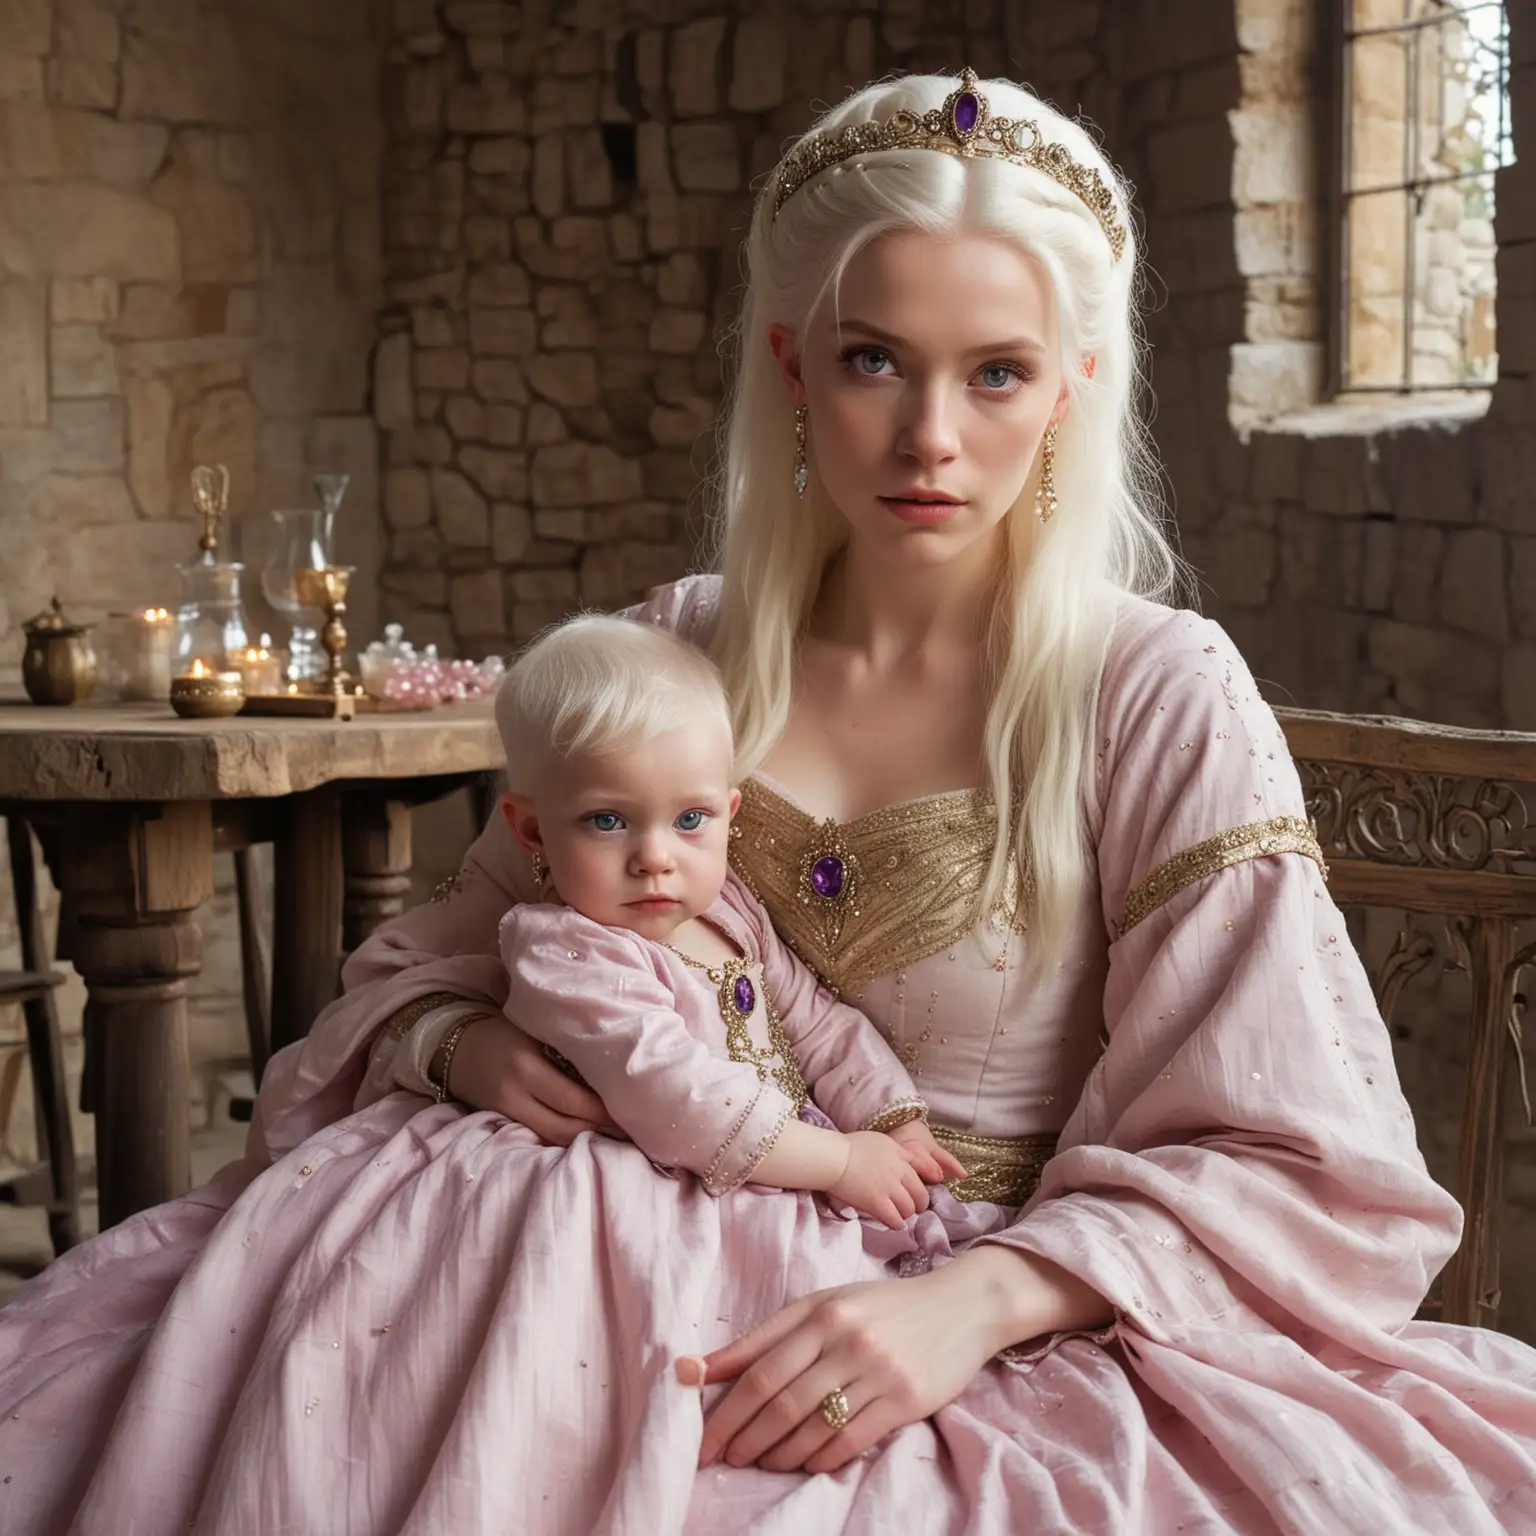 Rhaenyra Targaryen, young woman, white hair and albino skin, with purple eyes, sitting back on a wooden hair at the head of a table, in a stone chamber in a fortress stronghold, holding a swaddled baby, in a pale pink and gold medieval gown, decorated with gems and jewels, medieval setting